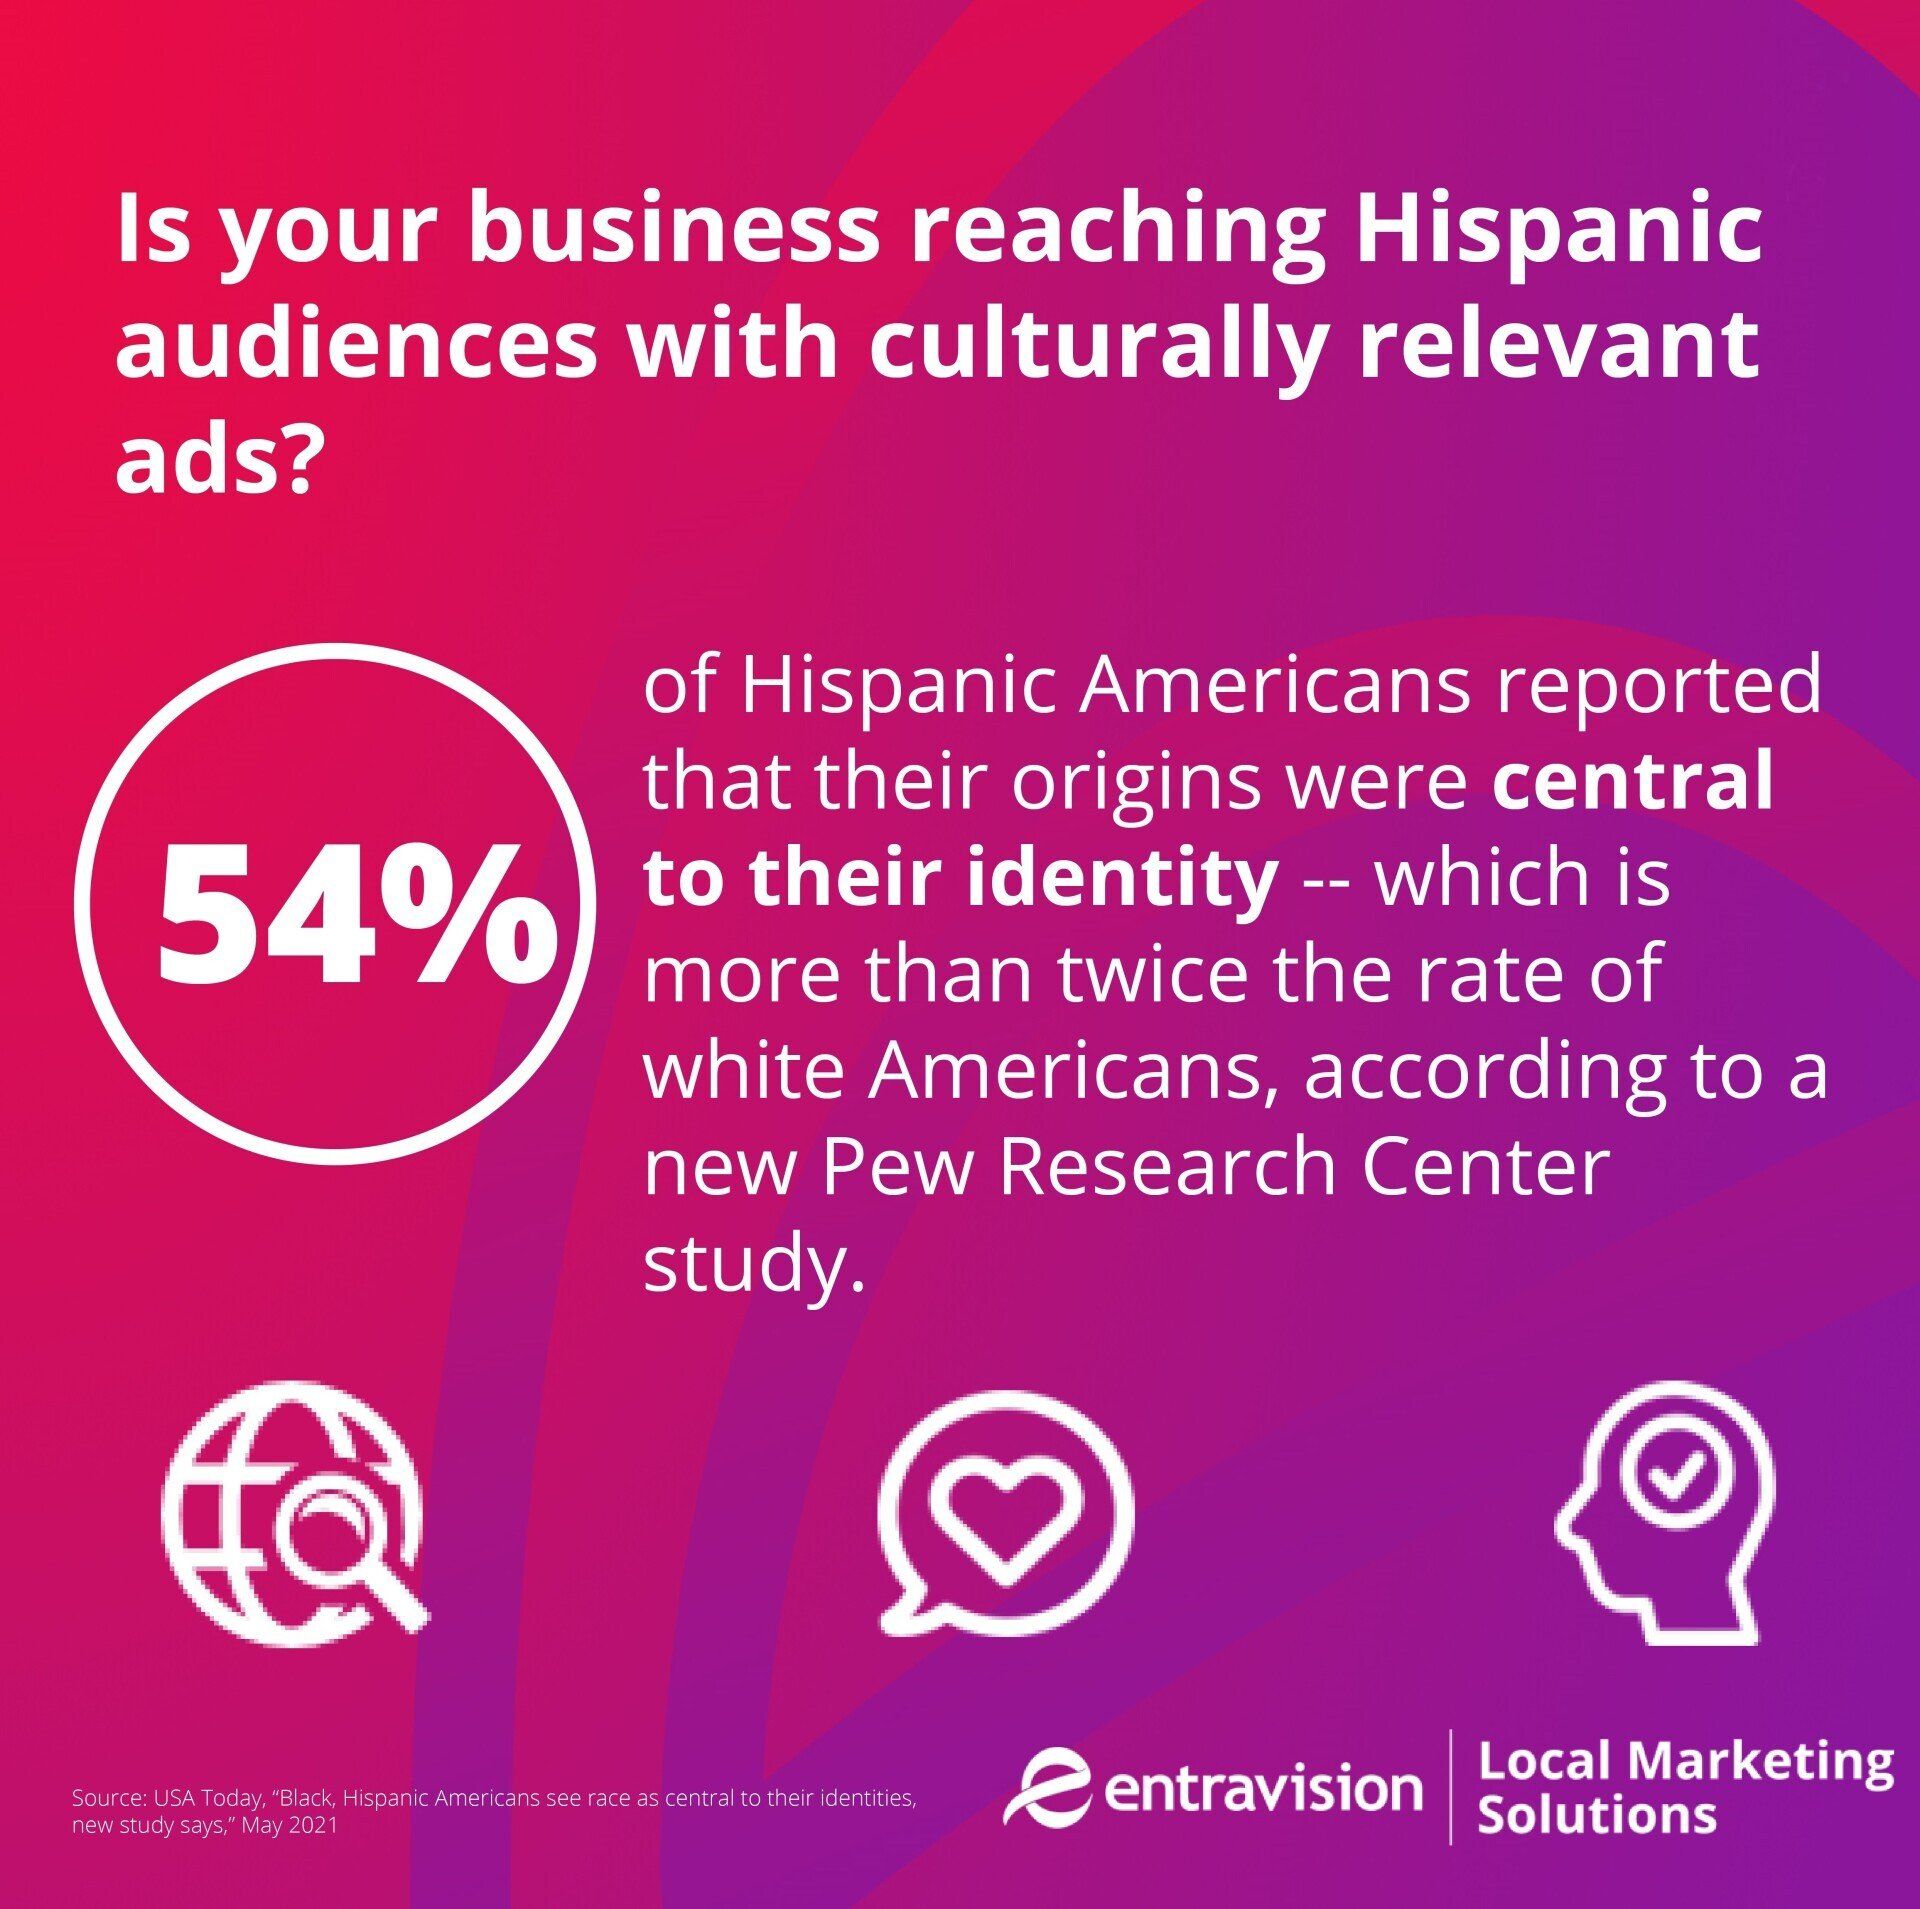 Hispanic marketing that utilizes culturally relevant ads is key, especially since Hispanic Americans view their origins as being central to their identity.